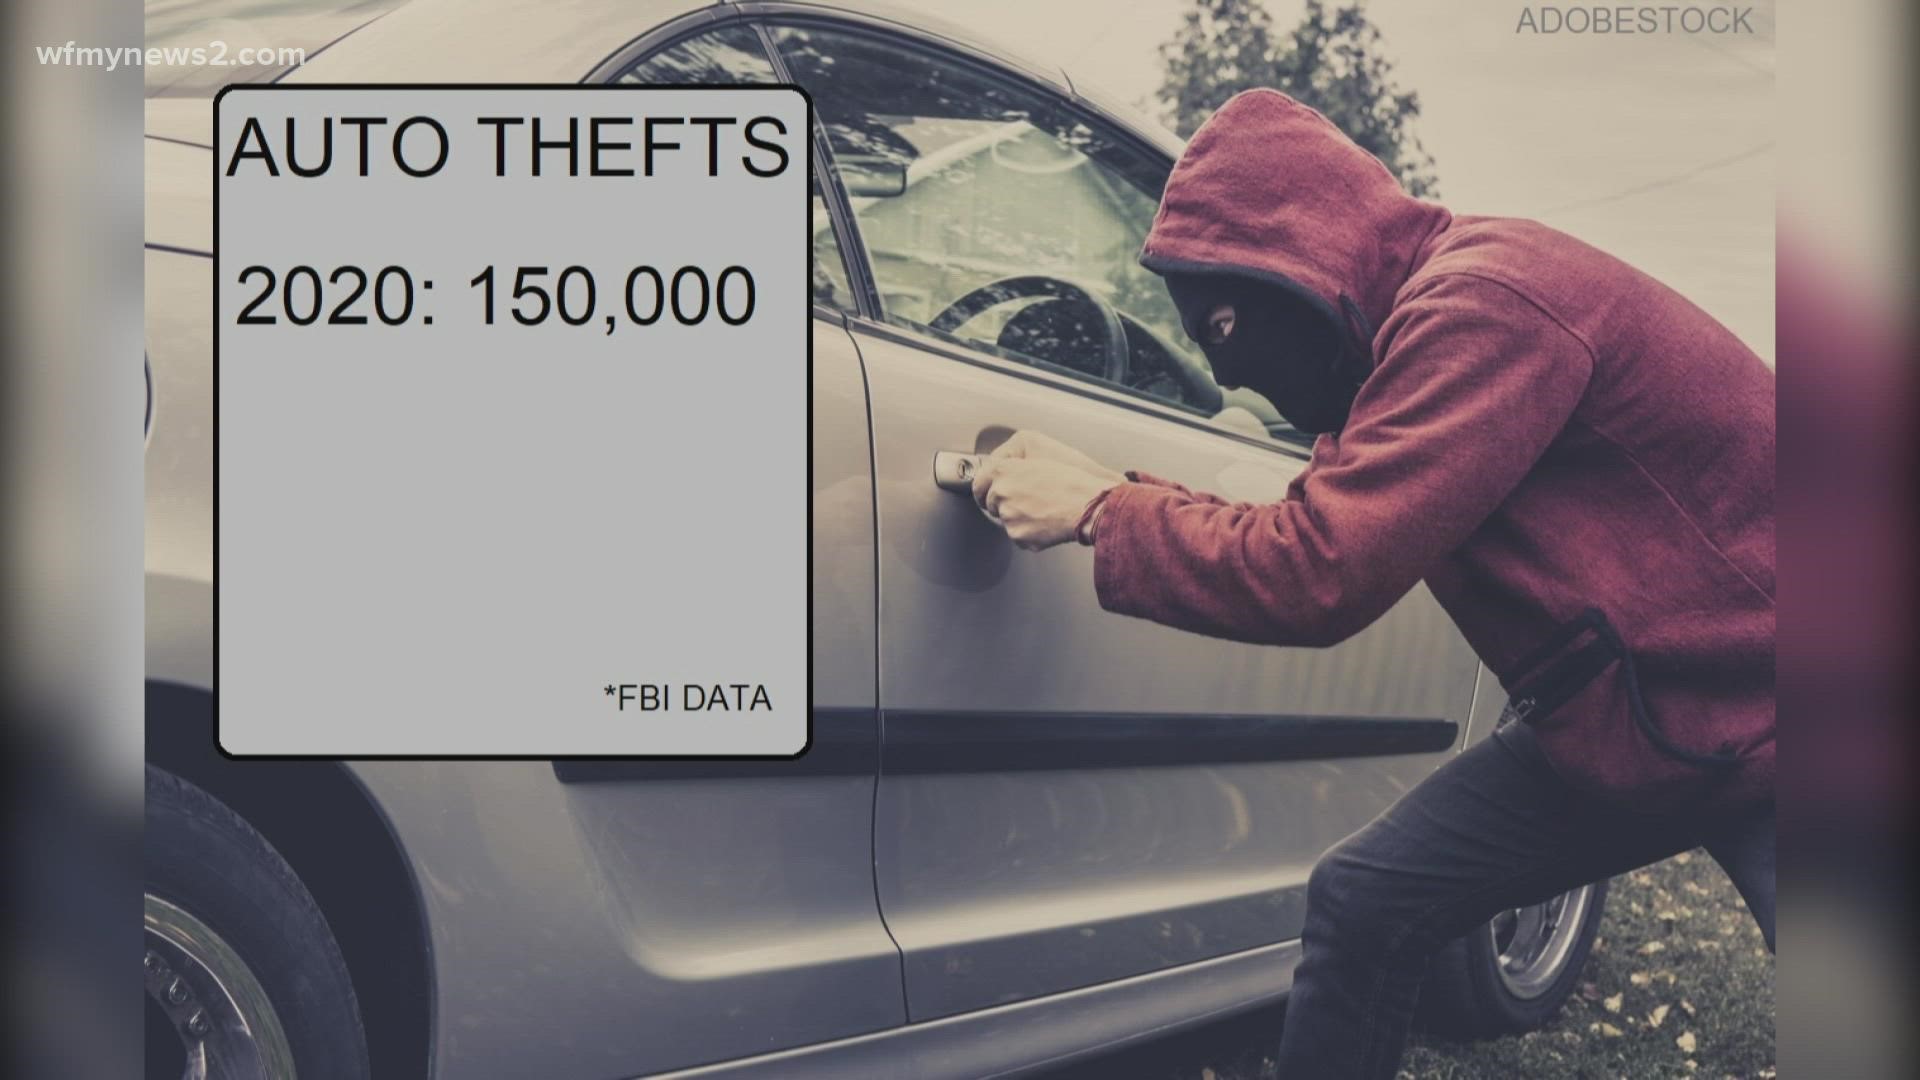 In the first nine months of 2020, 150,000 cars were stolen nationwide.